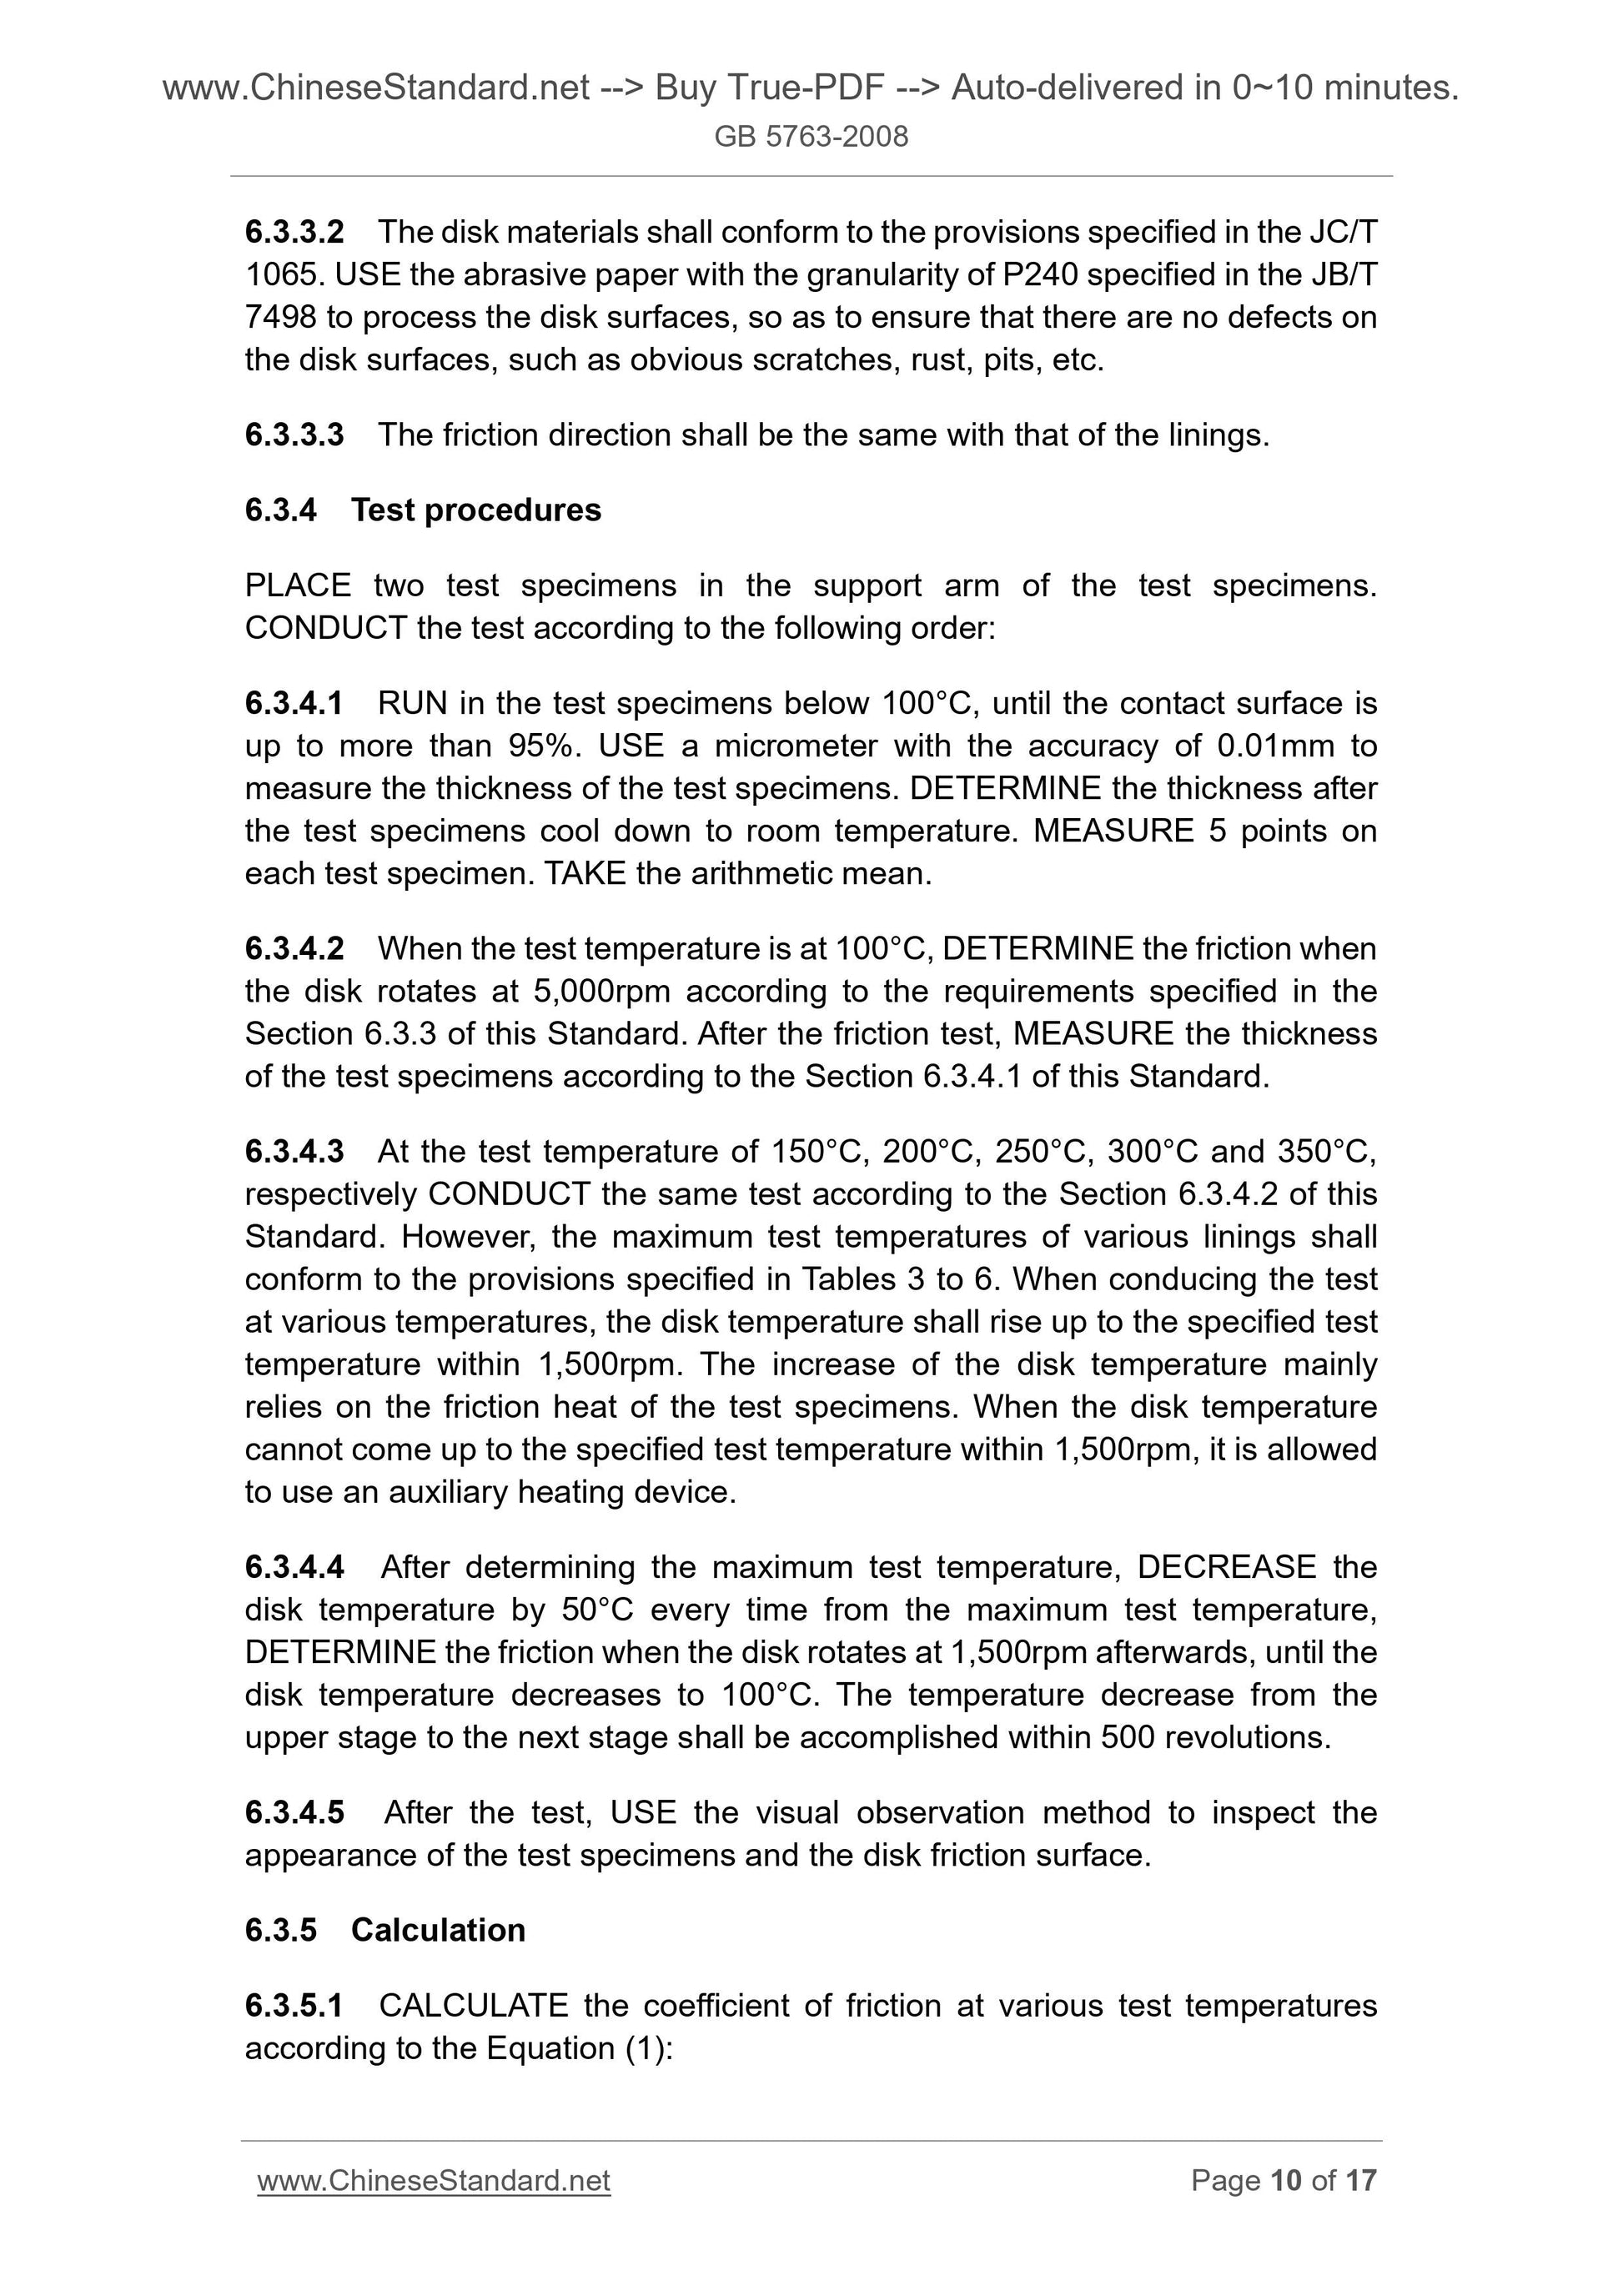 GB 5763-2008 Page 7